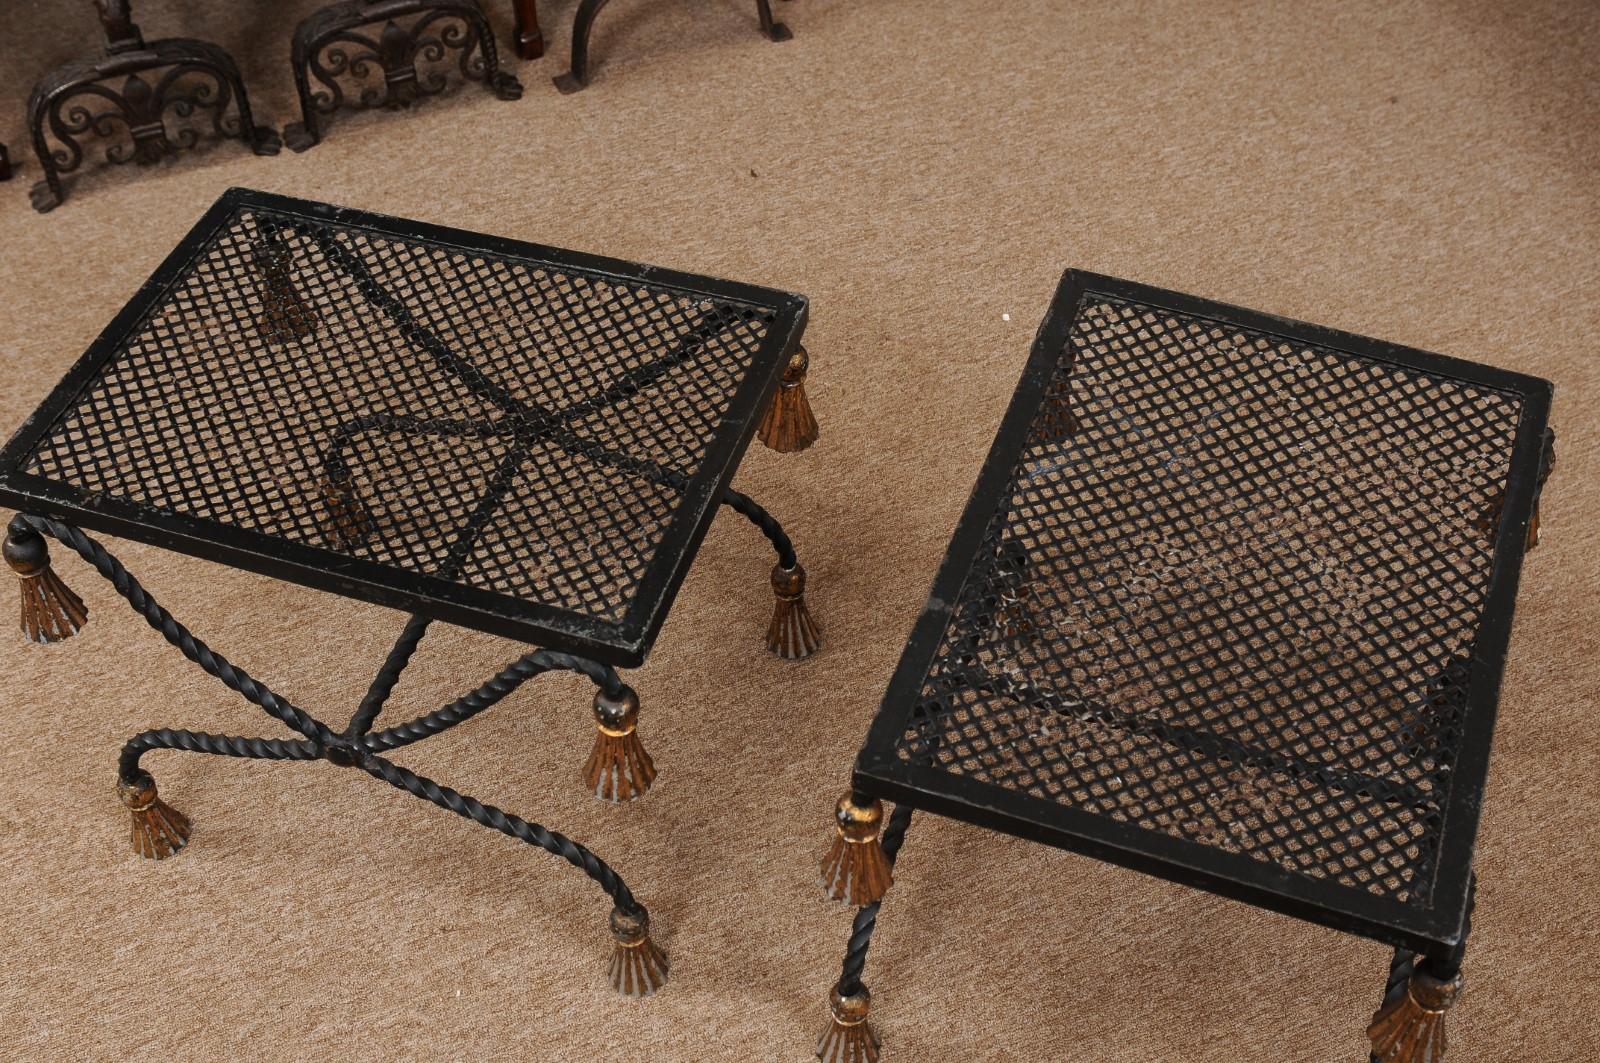 Pair of Vintage Black Painted & Gilt Iron Benches with Tassels, 20th Century For Sale 7